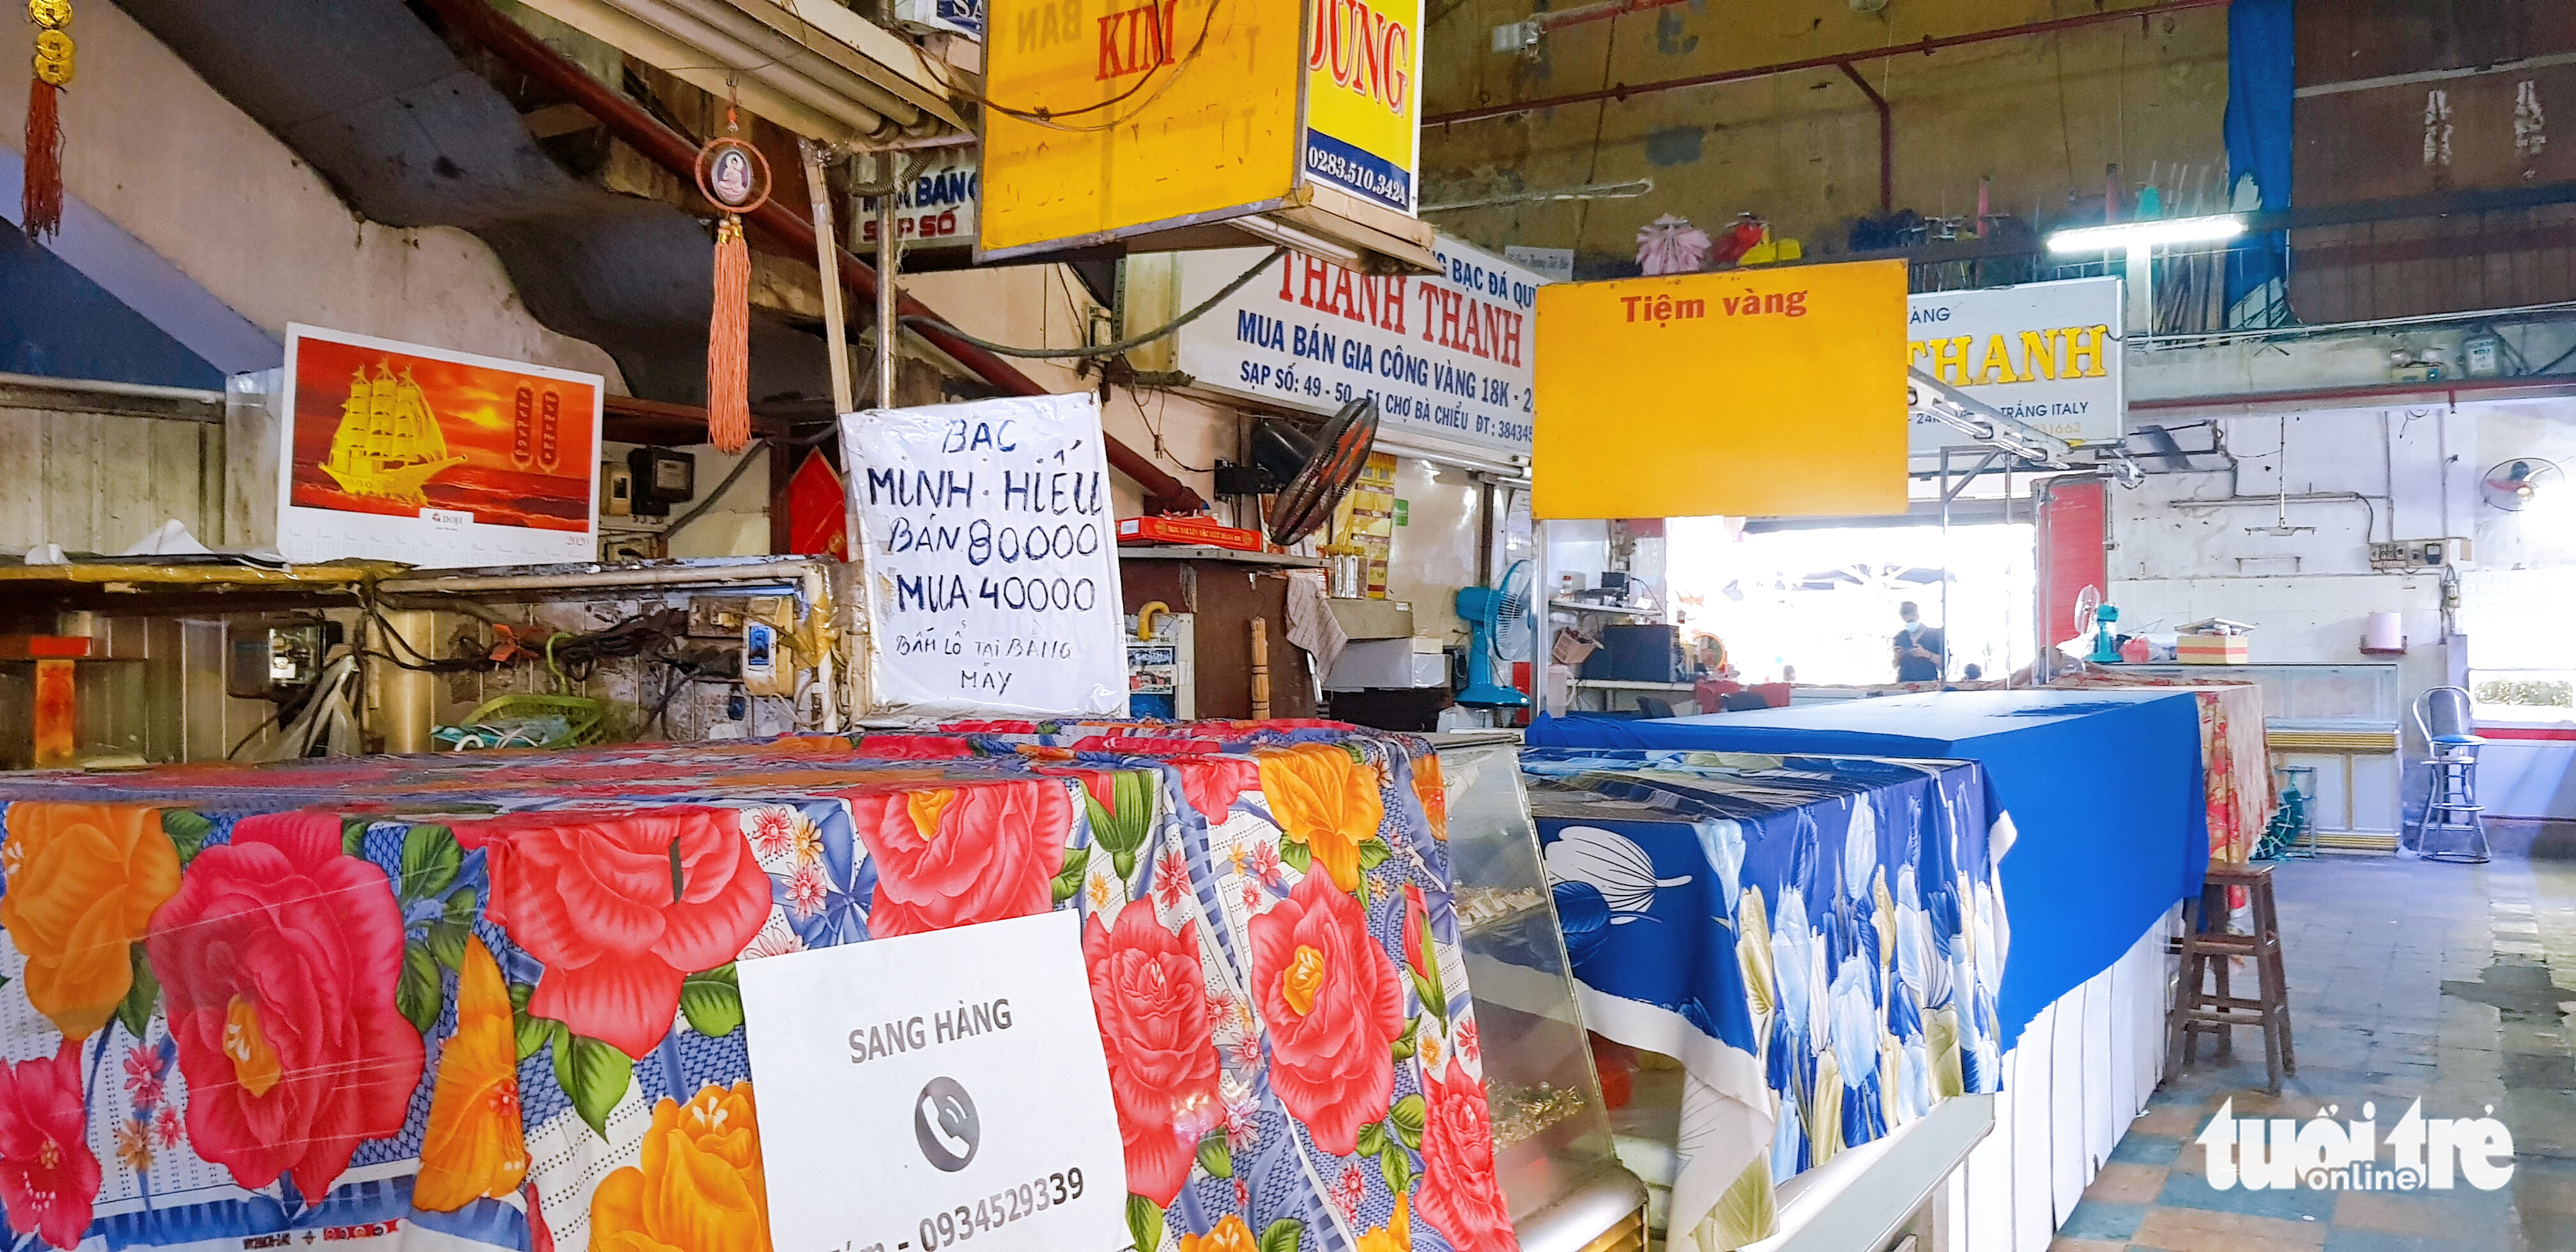 A ‘For rent’ paper is posted in front of a stall at Ba Chieu Market in Binh Thanh District, Ho Chi Minh City. Photo: Nhat Xuan / Tuoi Tre